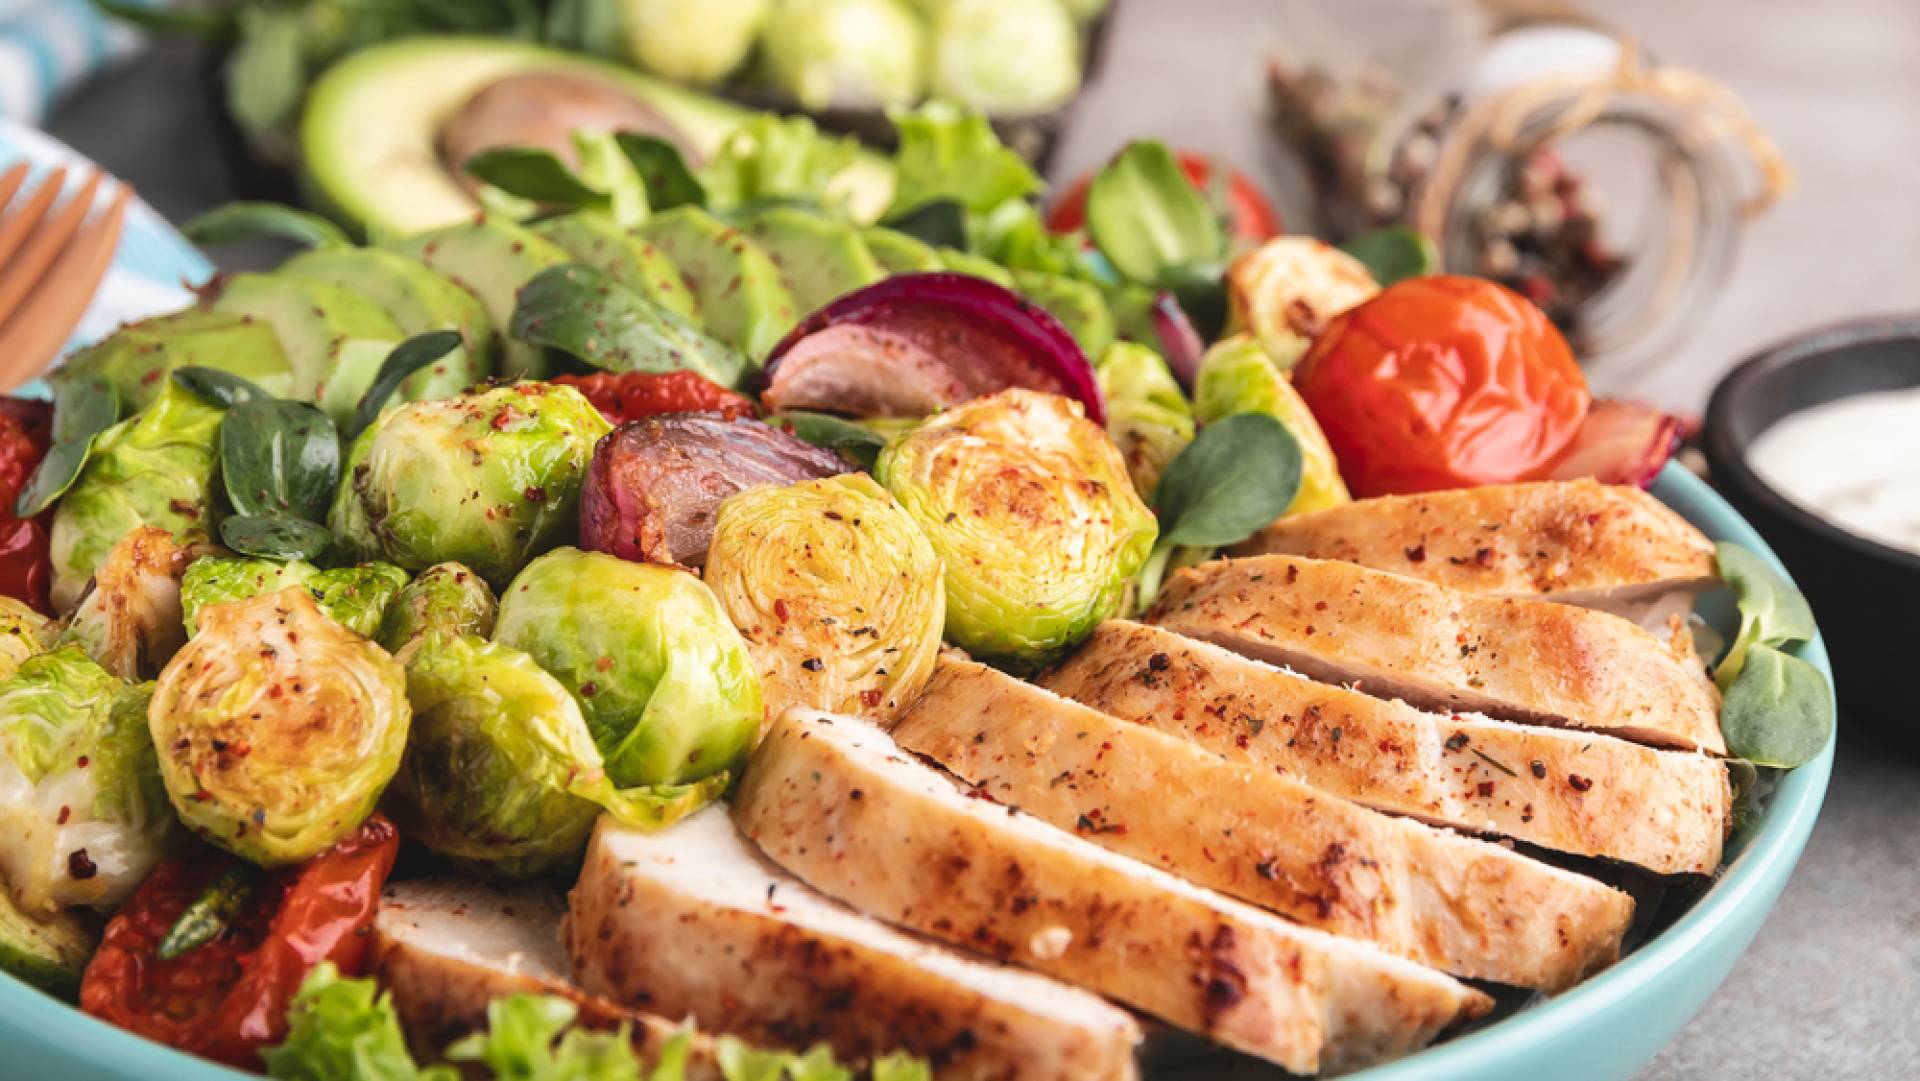 Grilled Chicken with Kale and Brussels Sprout Salad